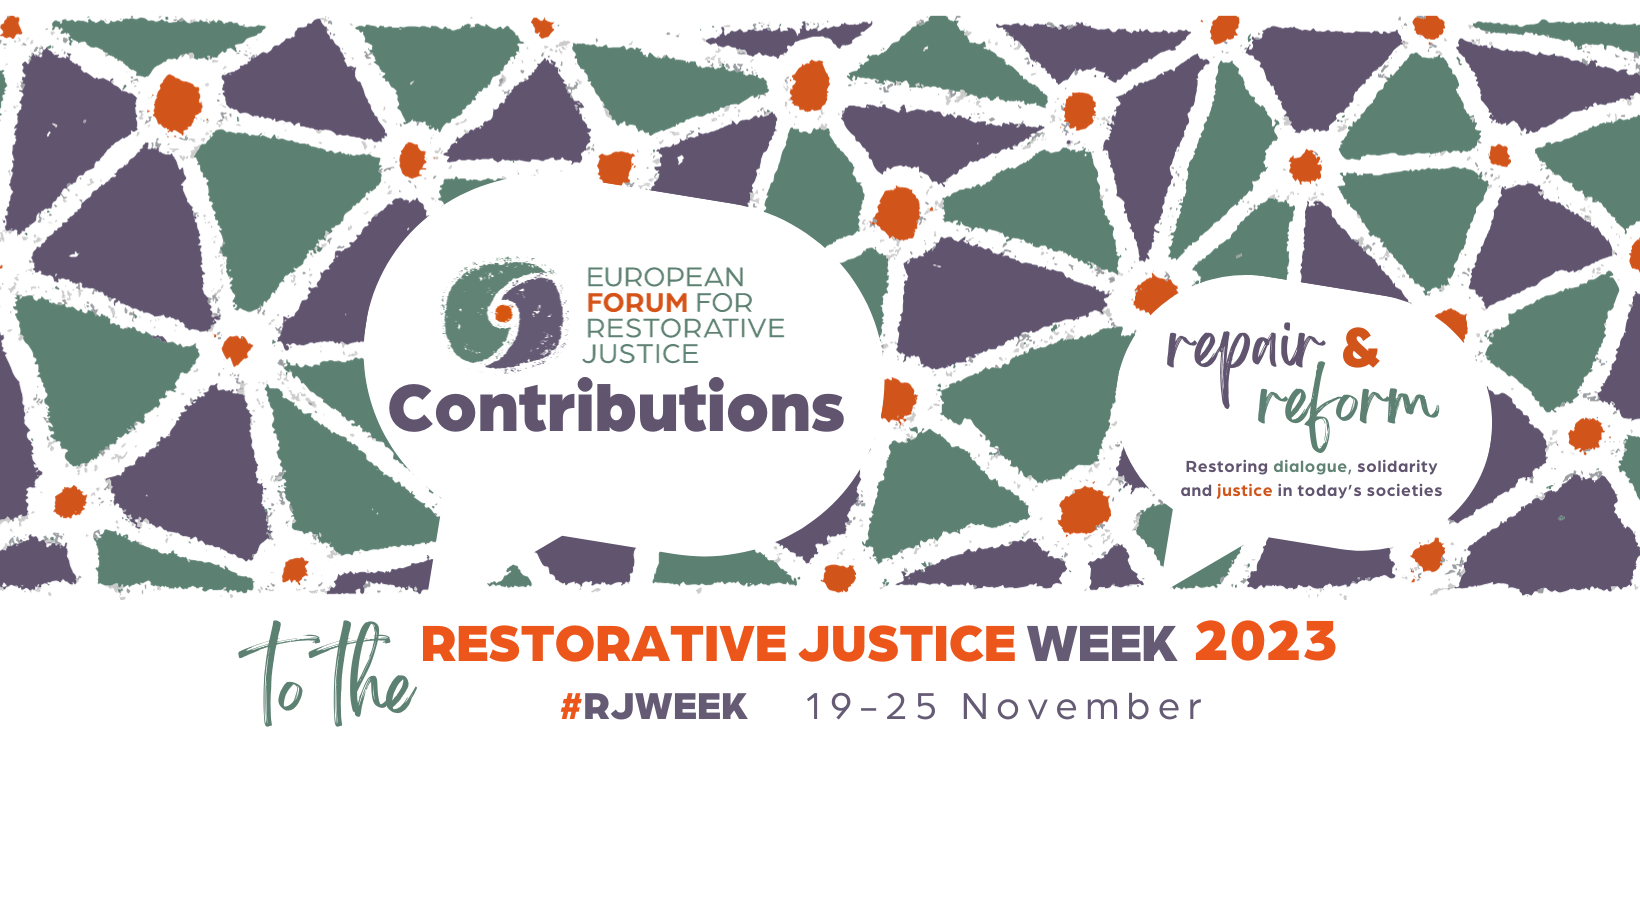 EFRJ Contributions to the RJWeek 2023